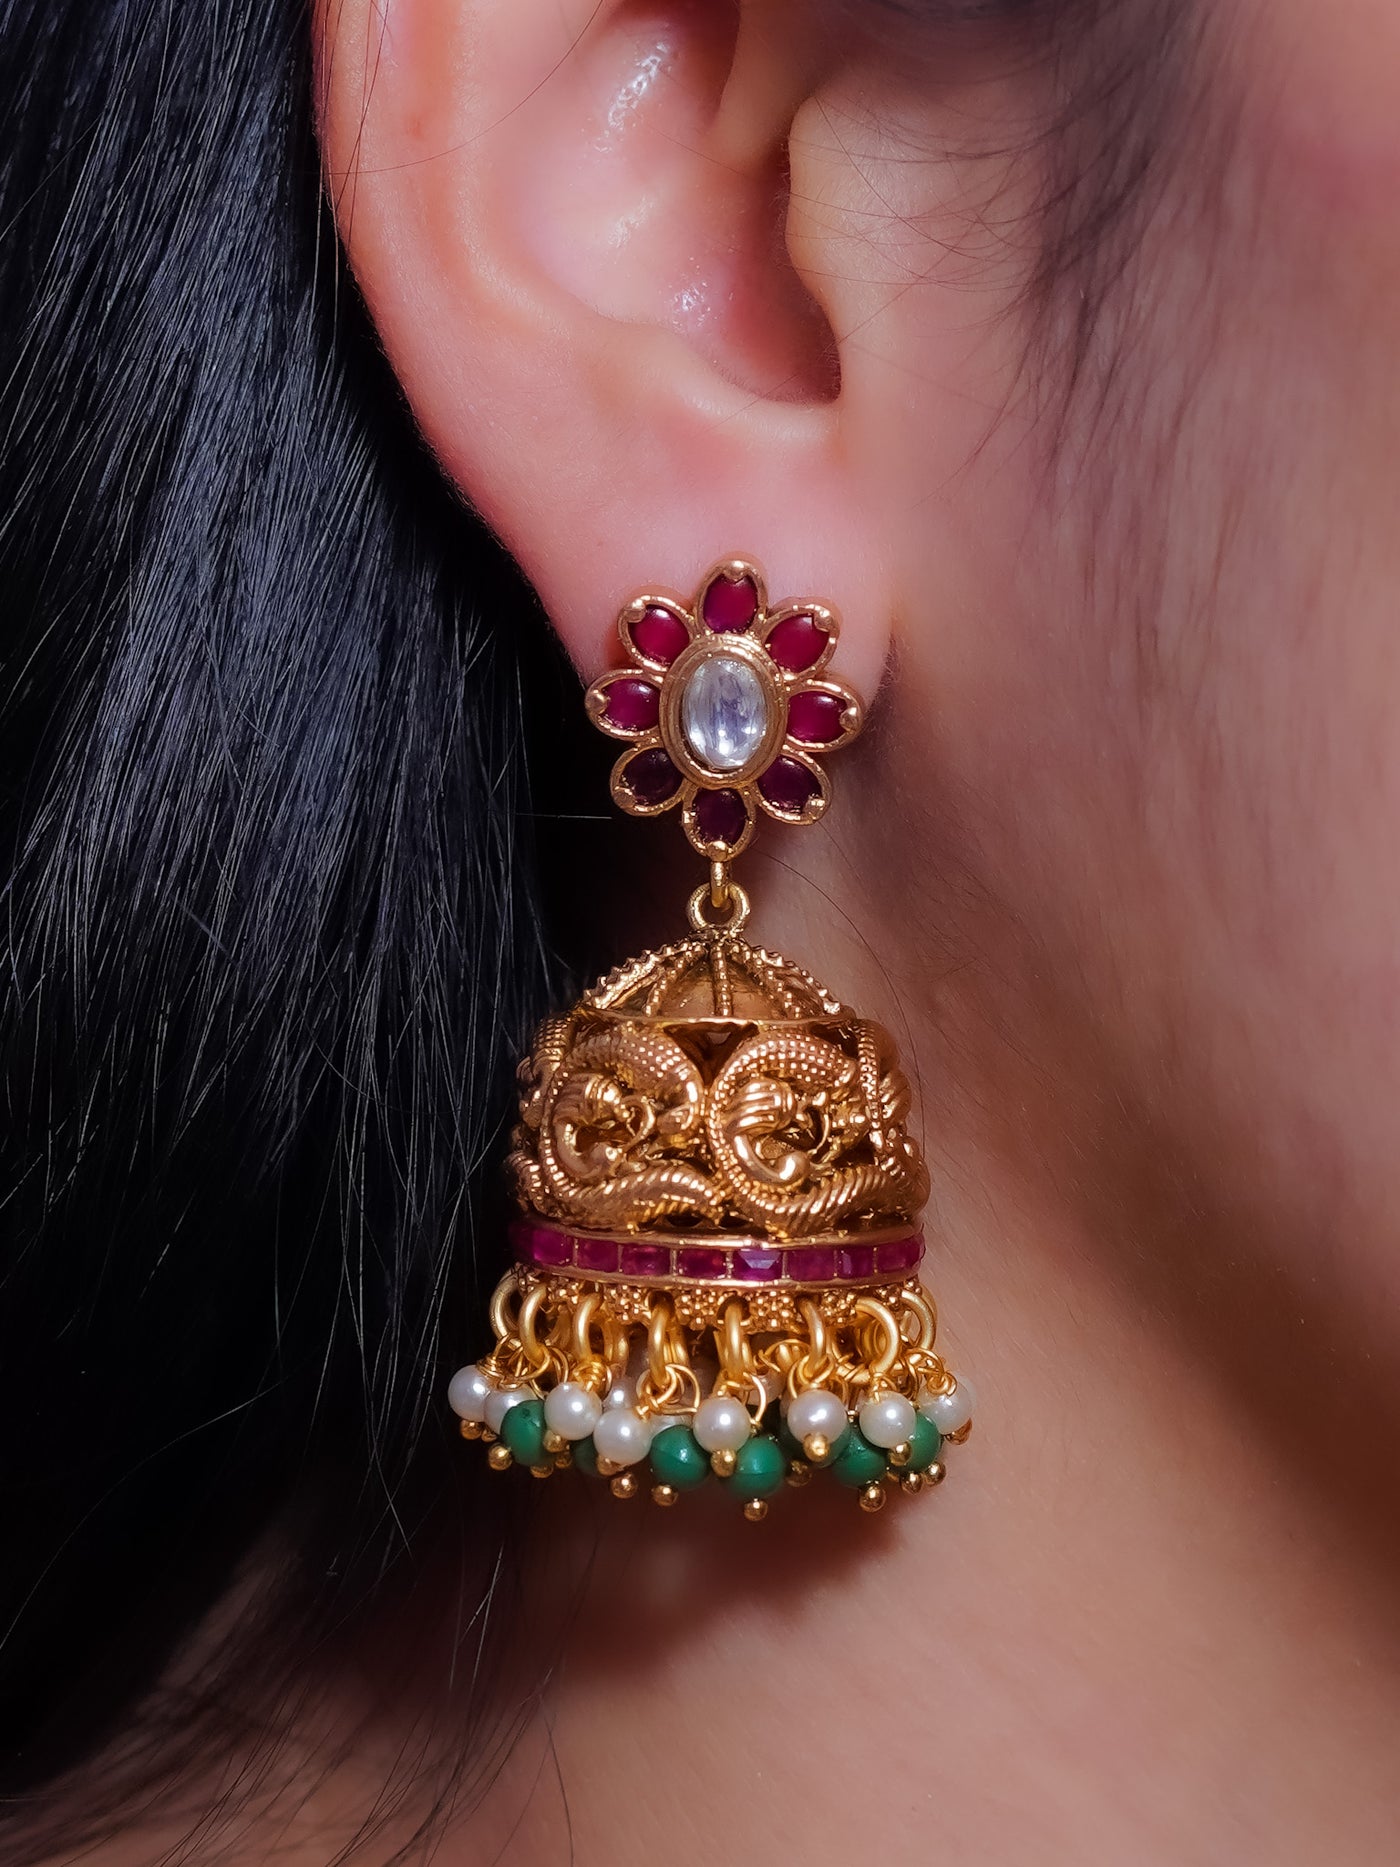 Heavy jhumkas with Pearl danglers in temple Jewellery (temple earrings) antique